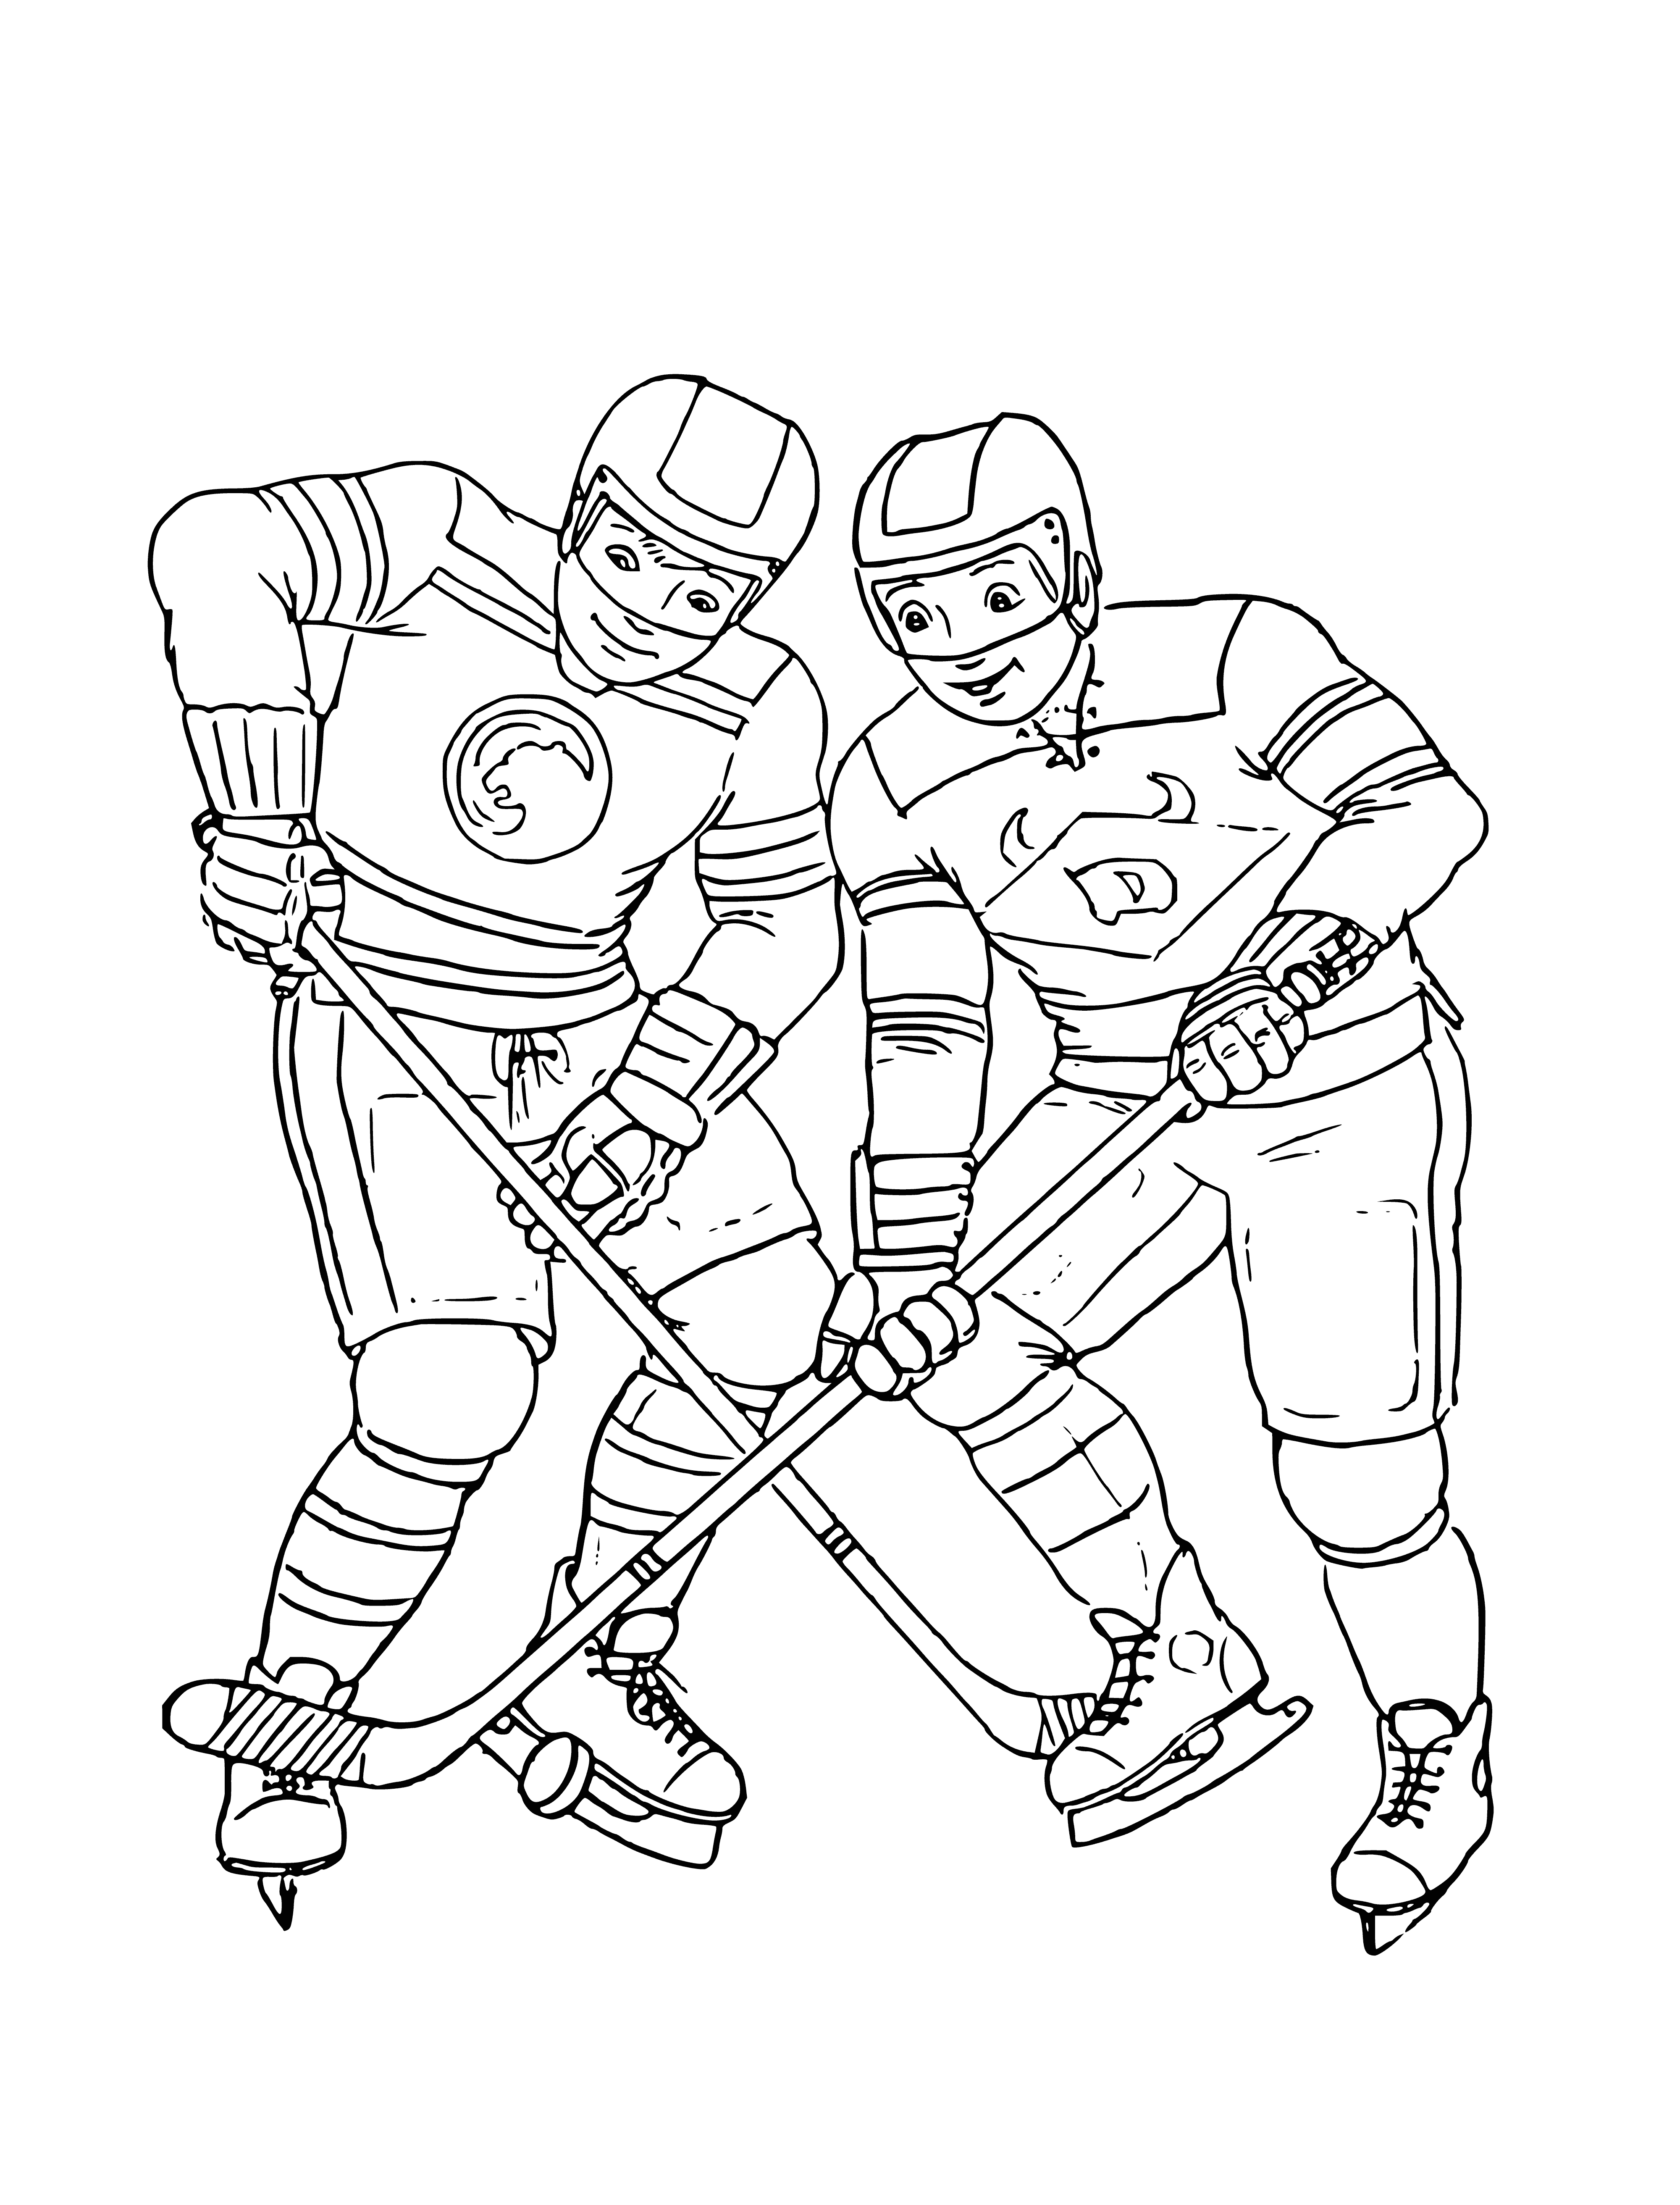 coloring page: Hockey: players use sticks to hit puck into opponent's net on a sheet of ice.